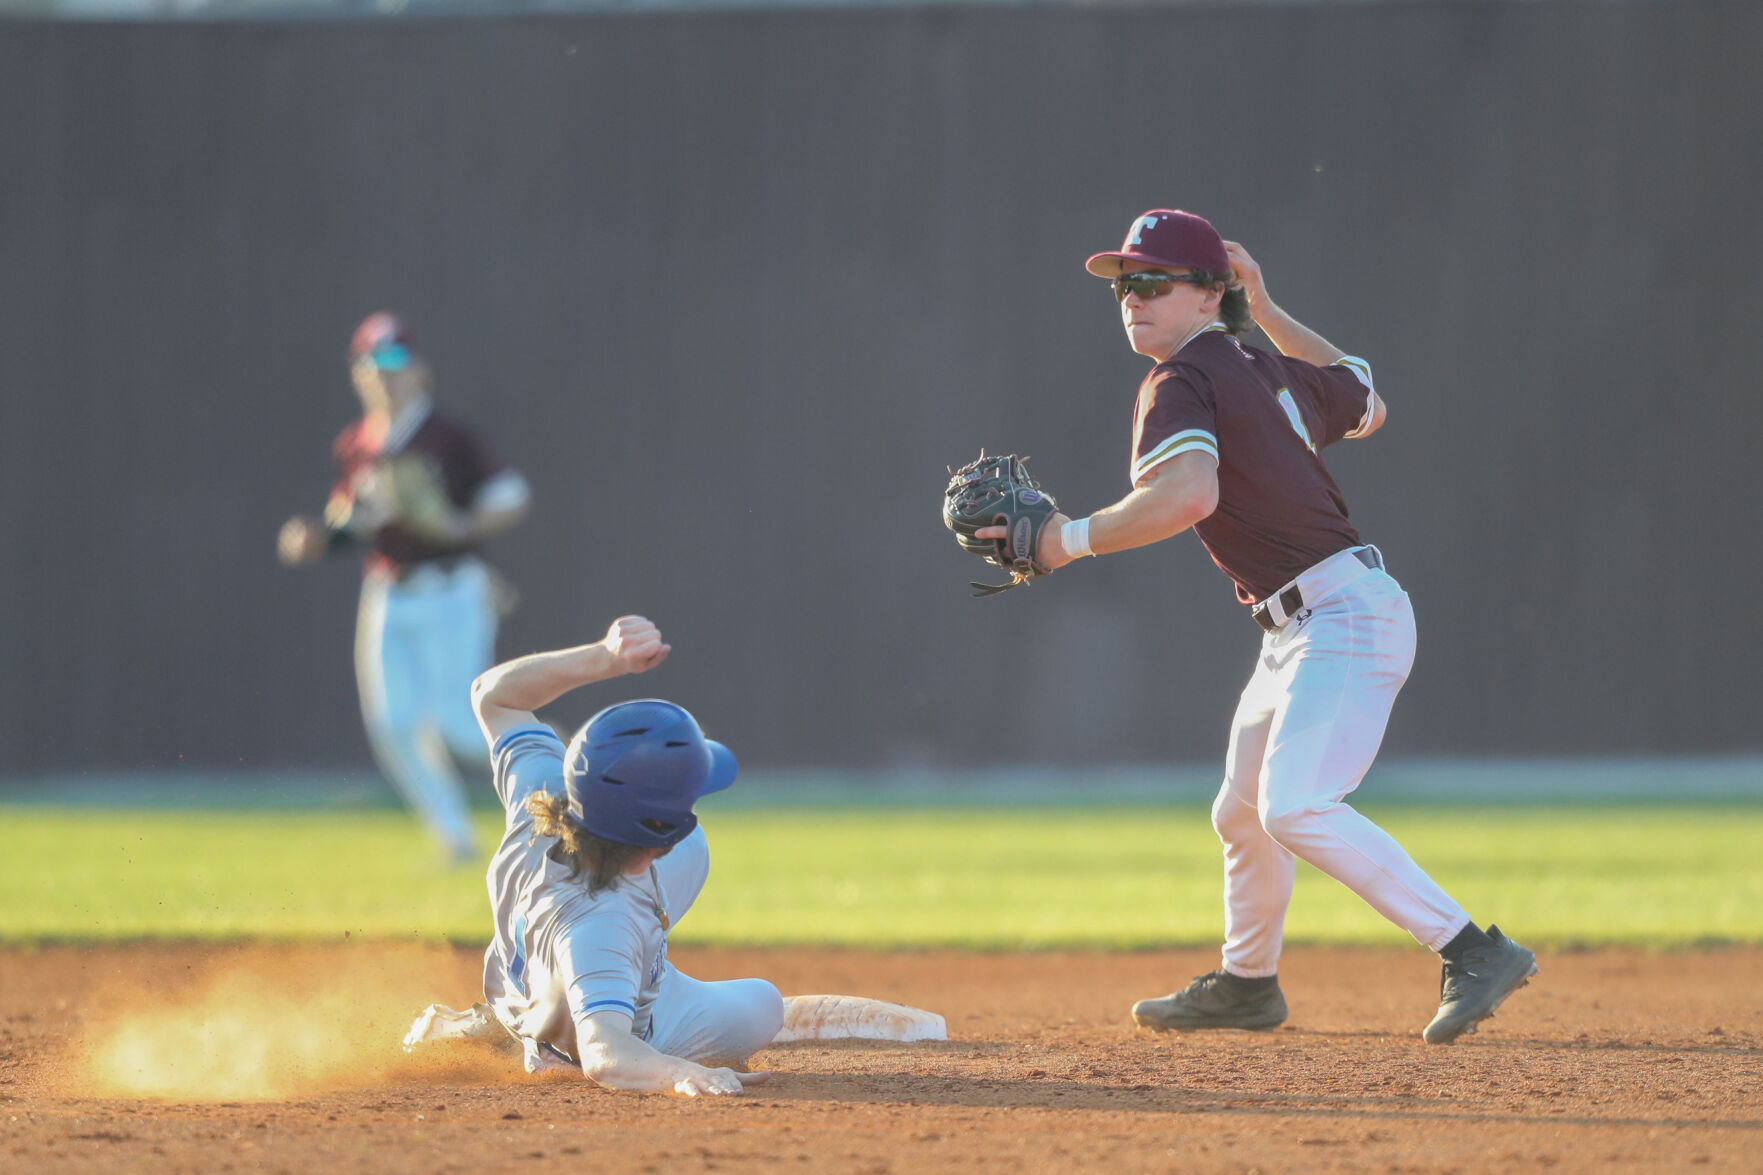 Tennessee High’s Musick Dominates in 18-1 Victory Over West Ridge Baseball